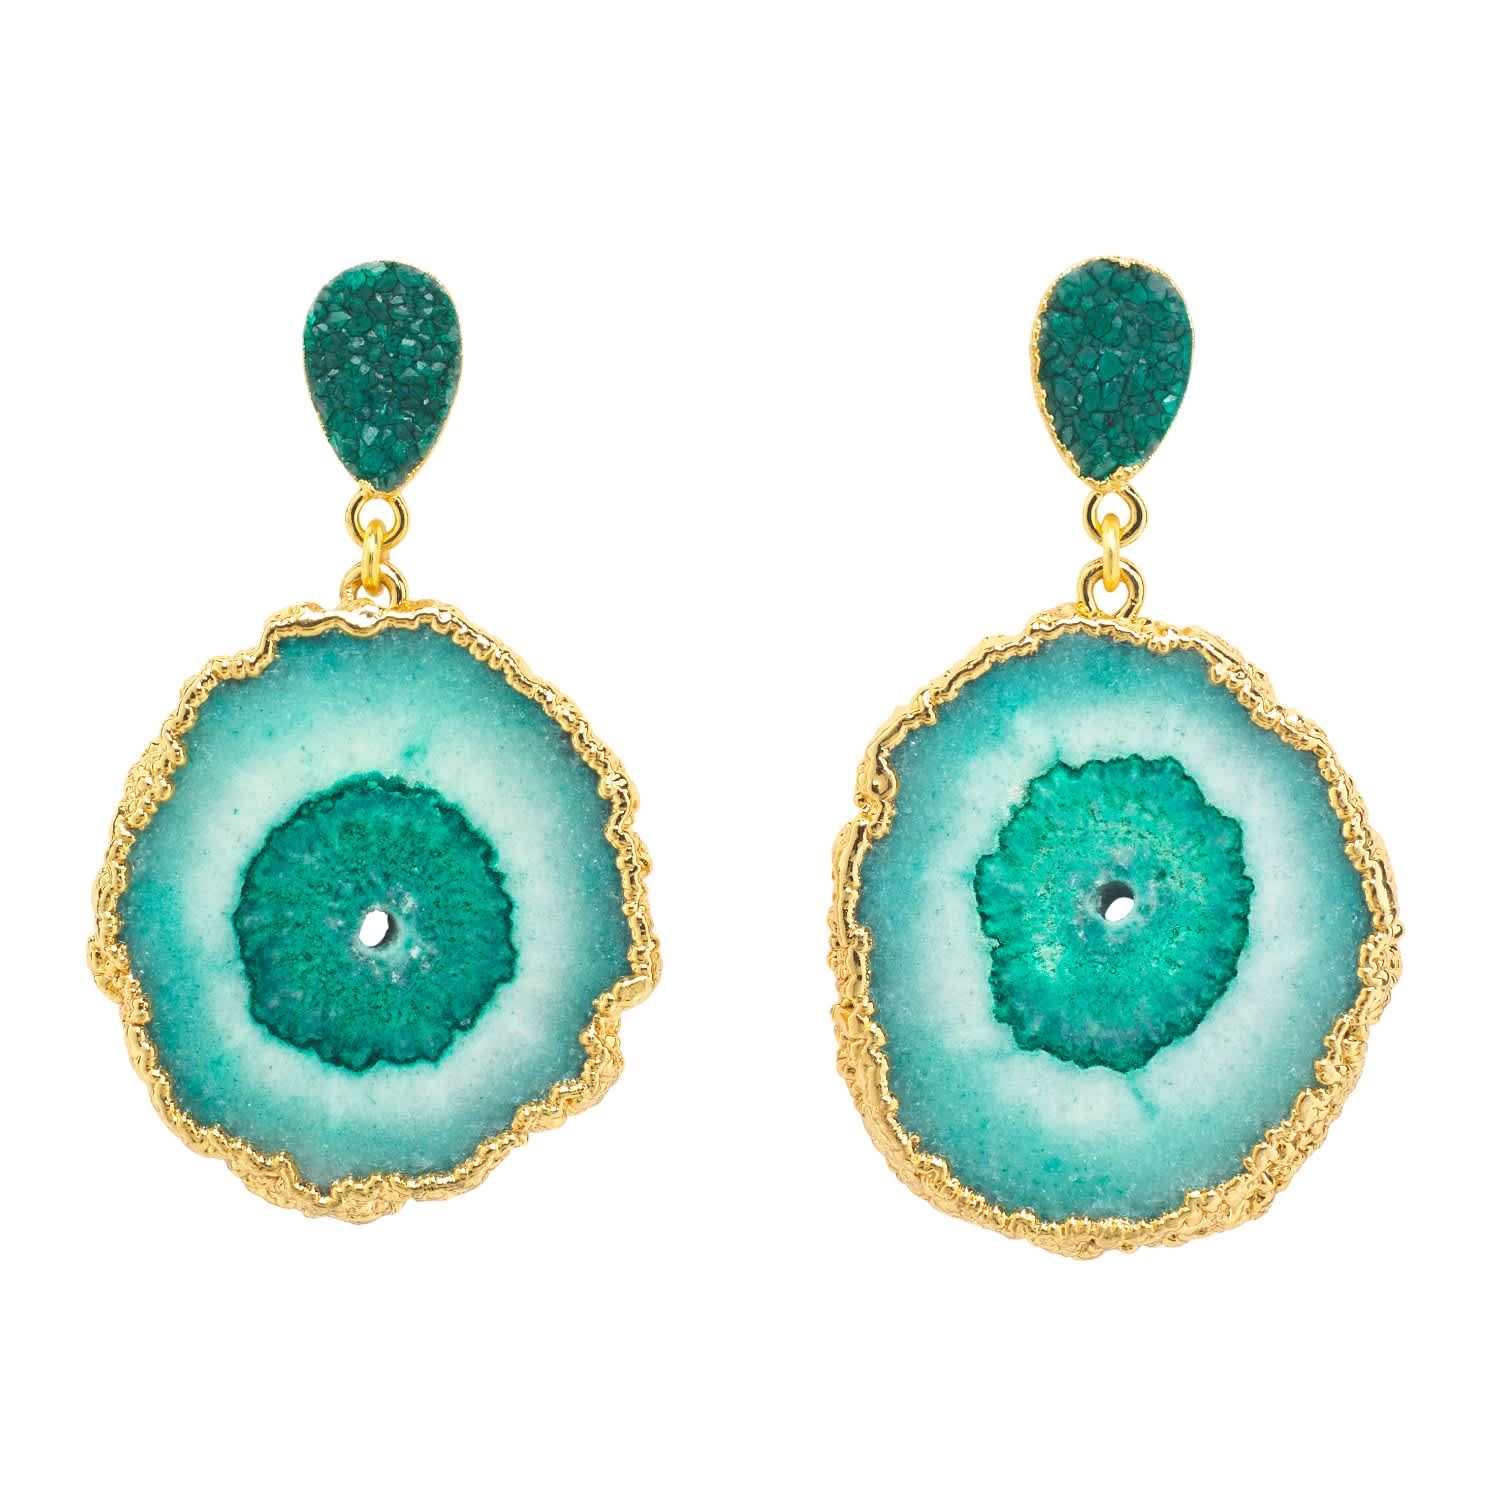 Green Gemstone 'So Solar' Gold Earrings by YAA YAA LONDON | Wolf and Badger (Global excl. US)